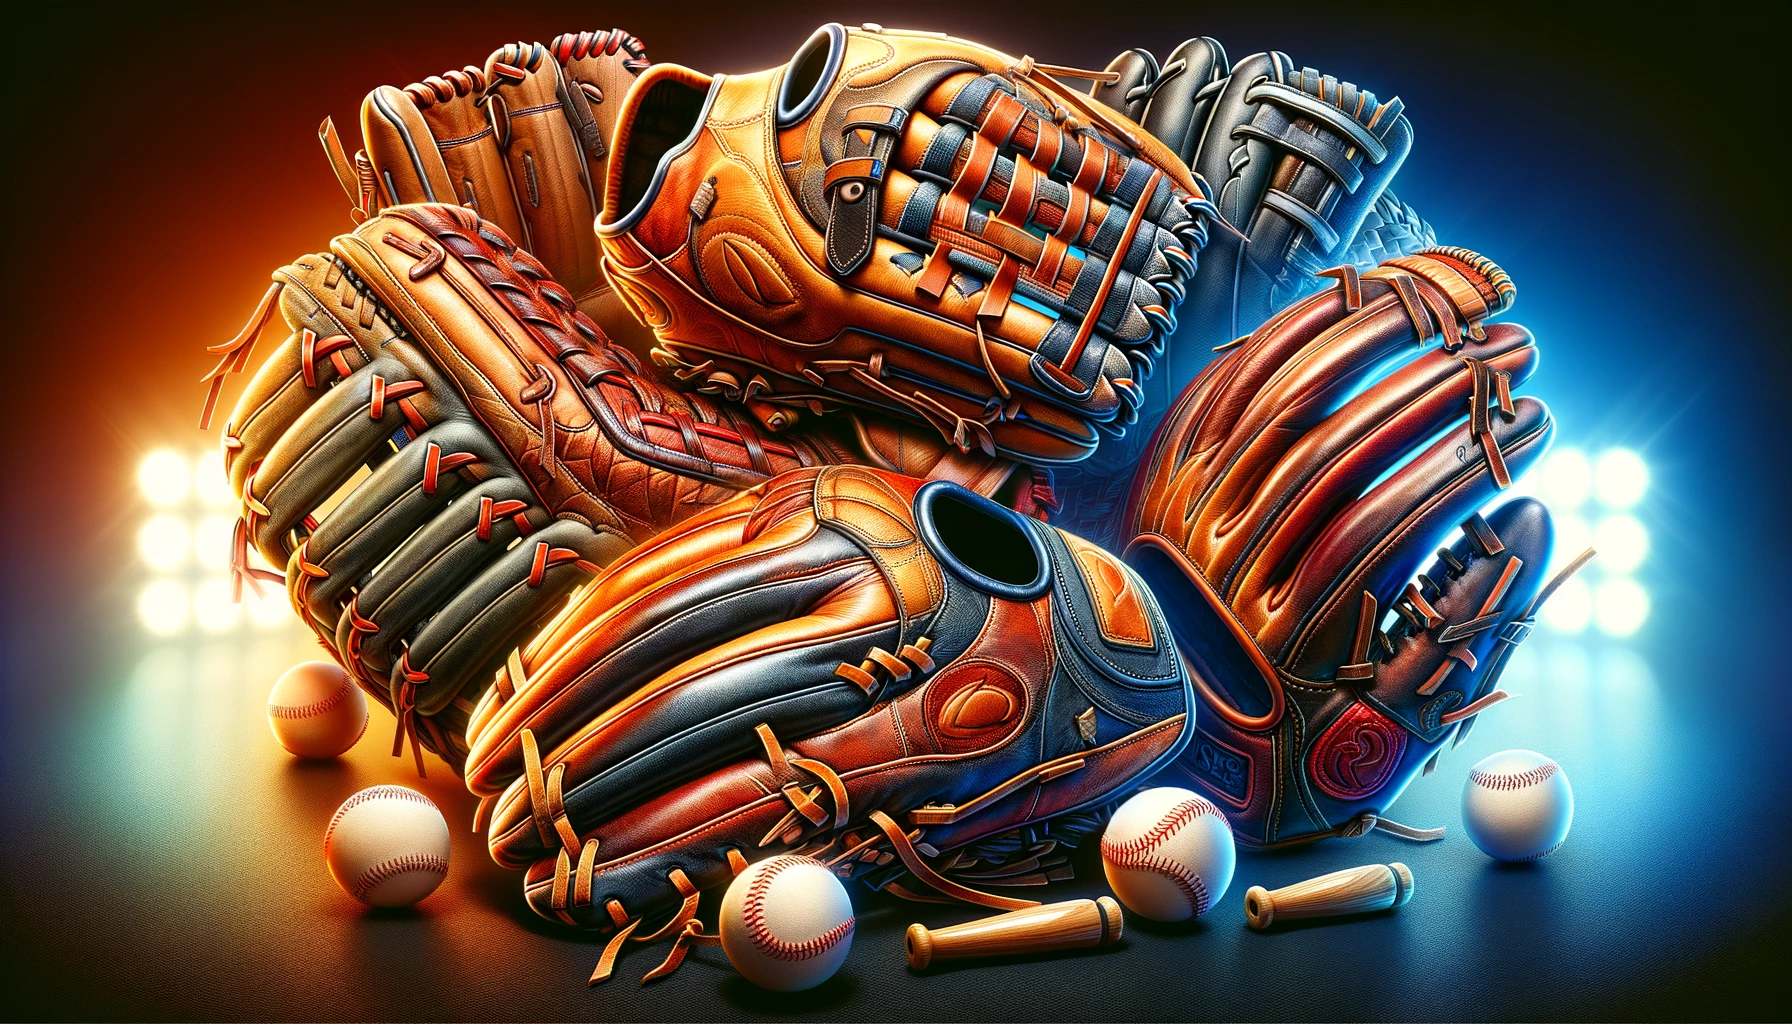 Most Expensive Baseball Glove: A Look at the Top 5 Costliest Options